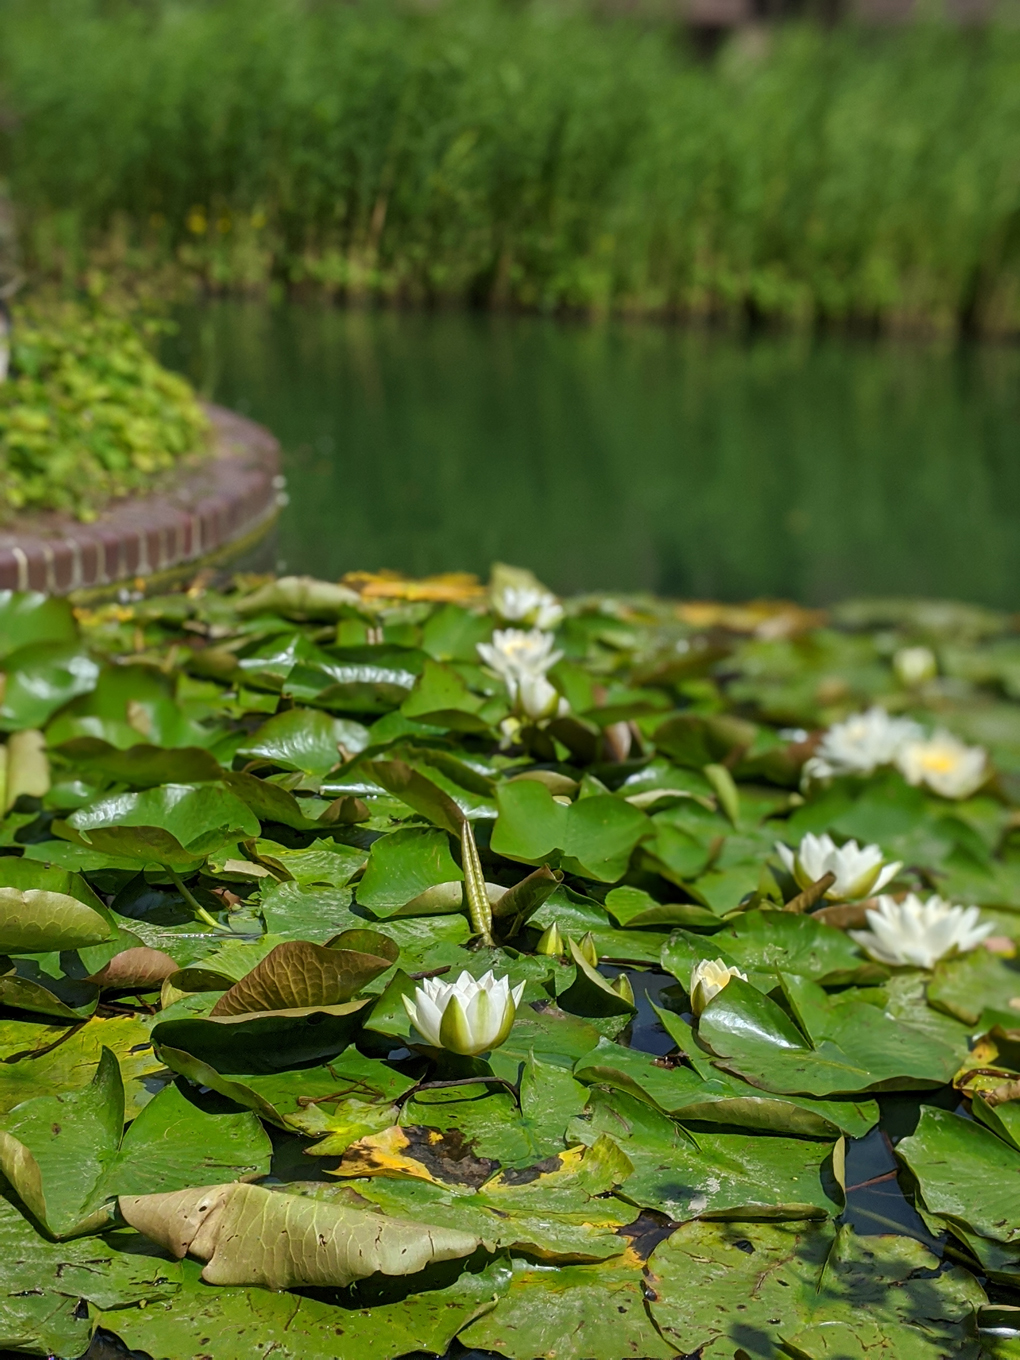 Water lilies gathered on water